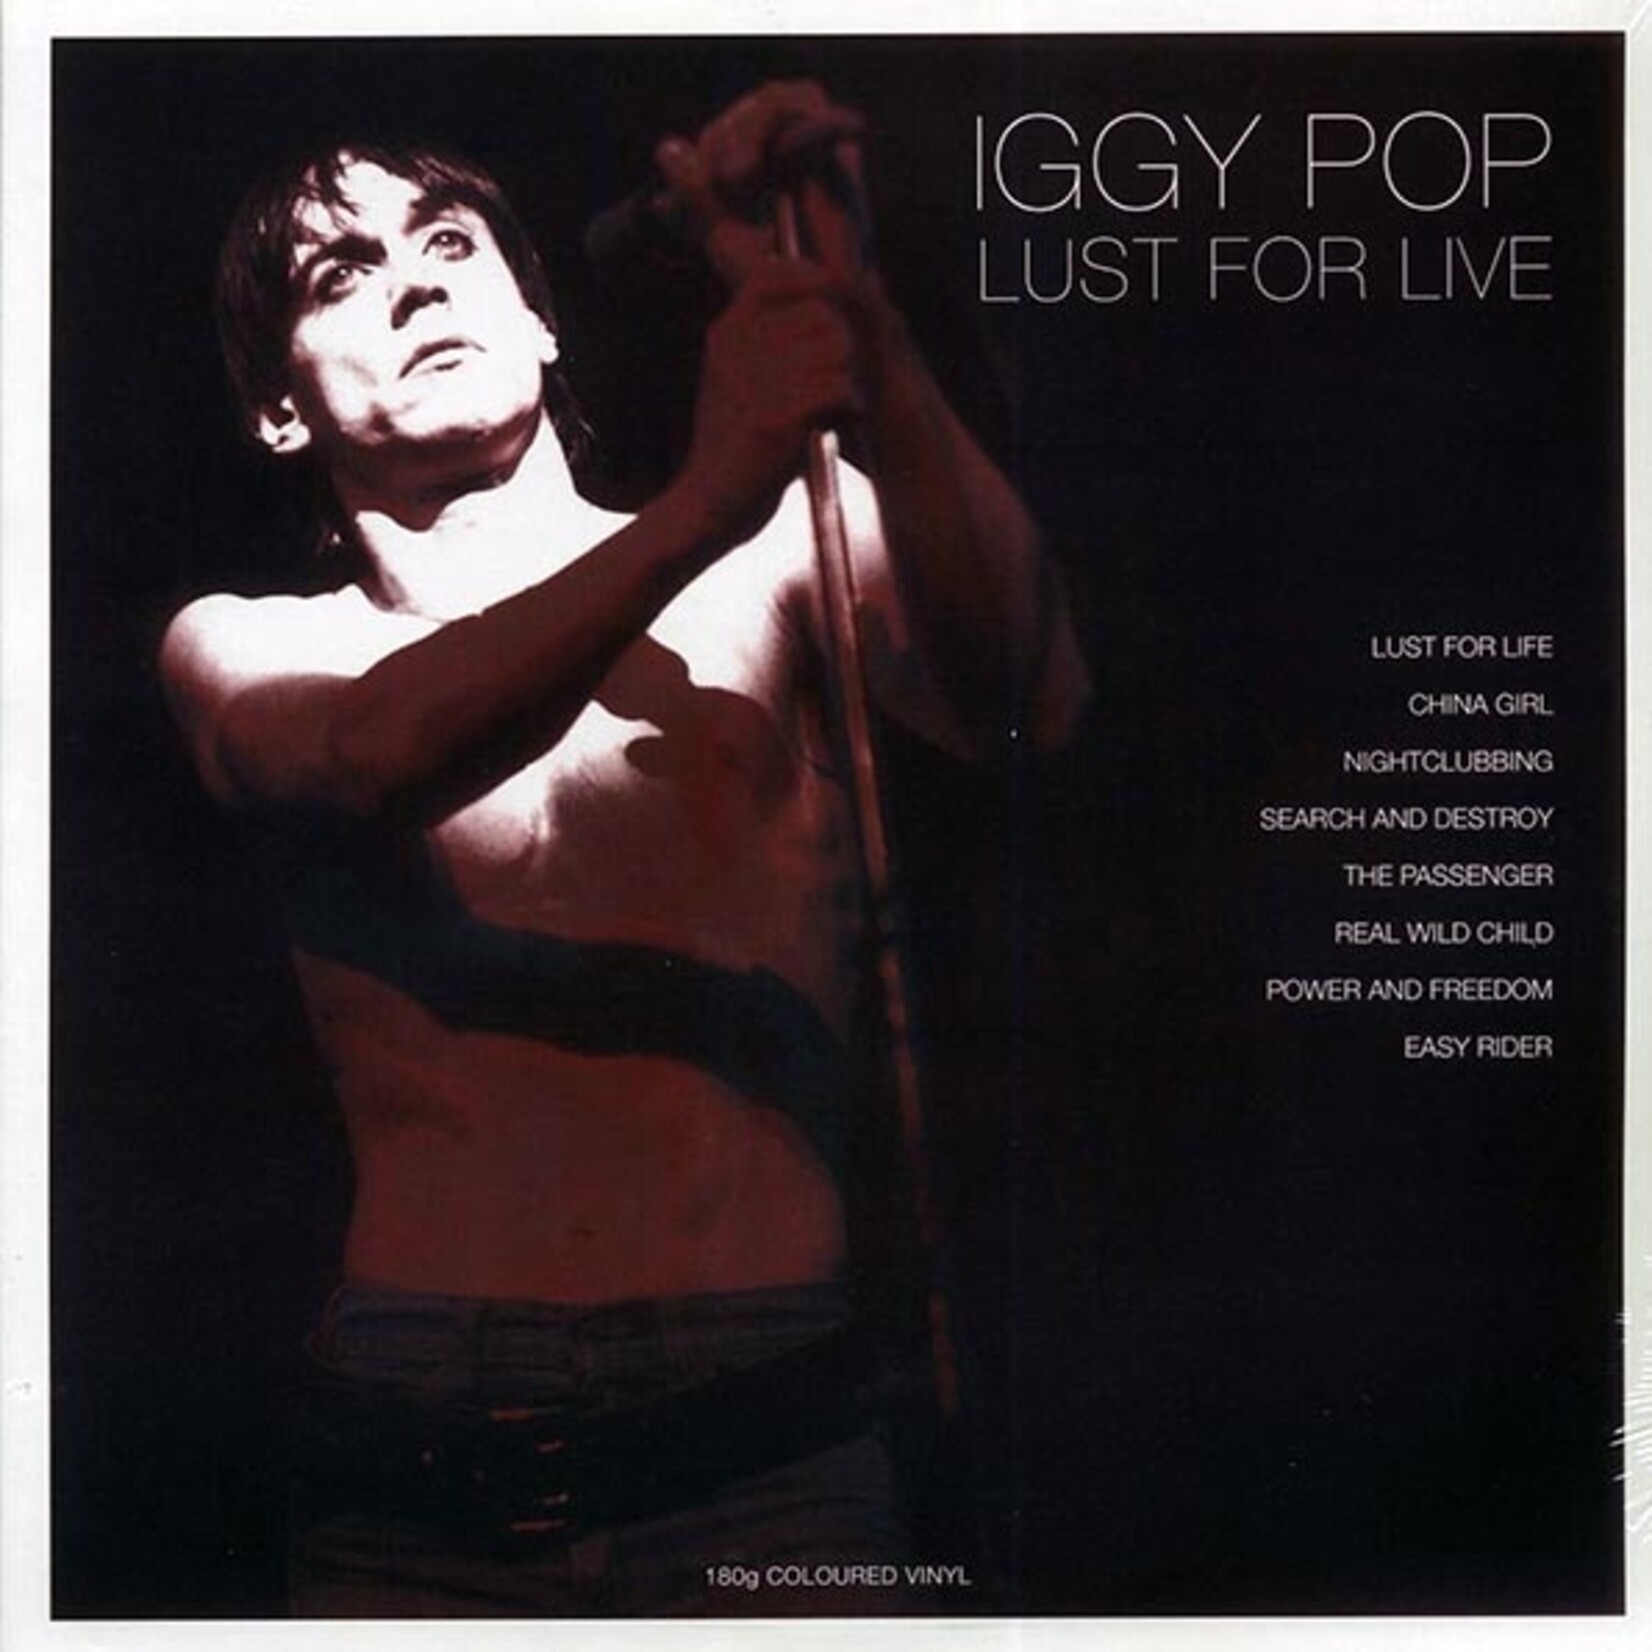 Iggy Pop - Lust For Live (Not Now Music) (180g) (Colored vinyl (white))